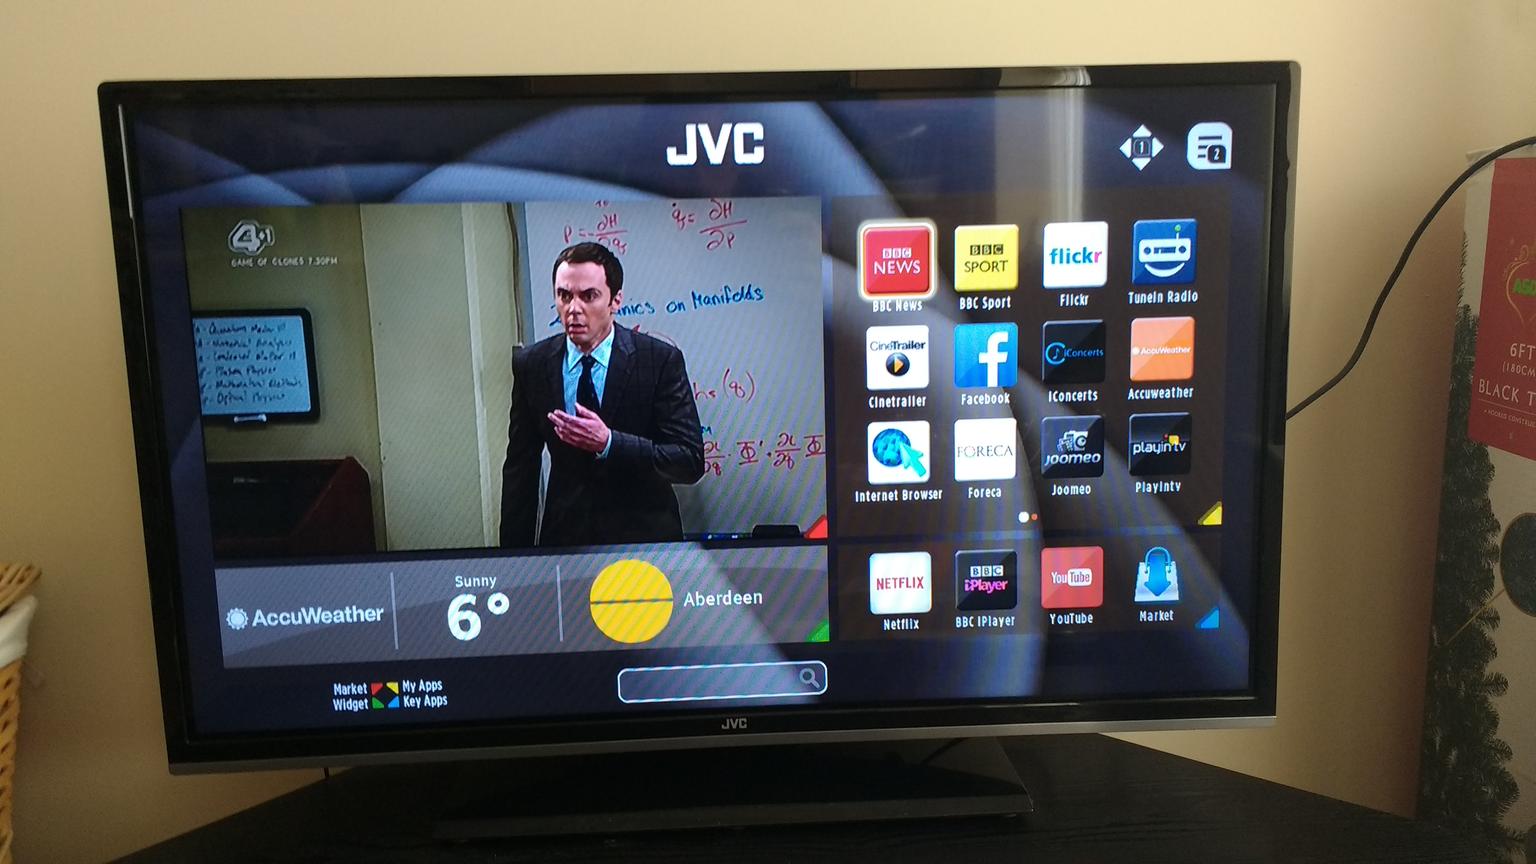 32 Jvc Lt 32c650 Smart Tv In L6 Liverpool For 150 00 For Sale